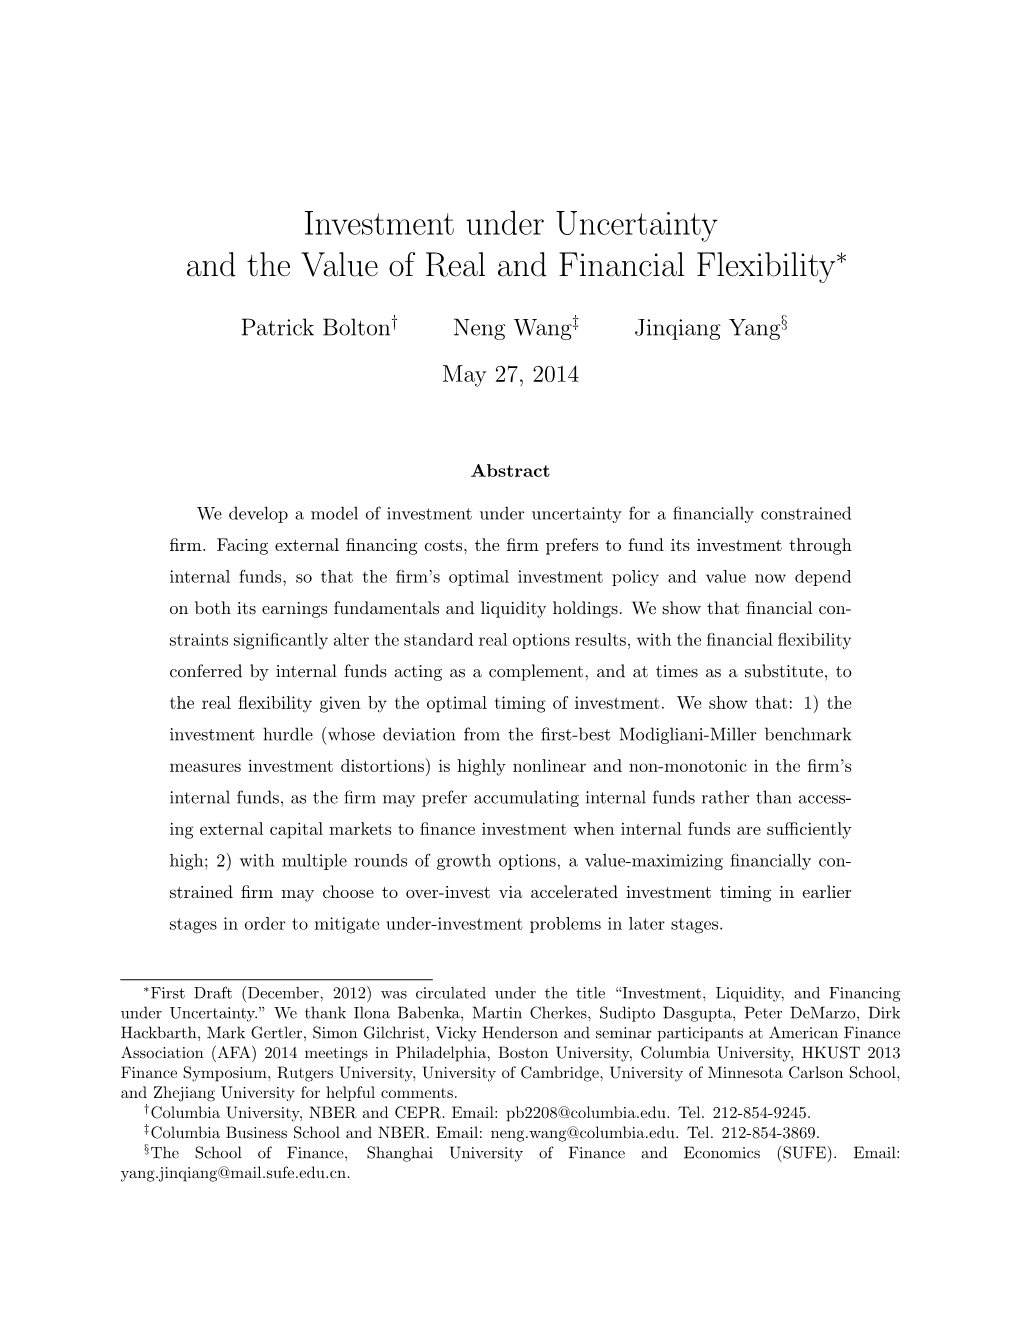 Investment Under Uncertainty and the Value of Real and Financial Flexibility∗